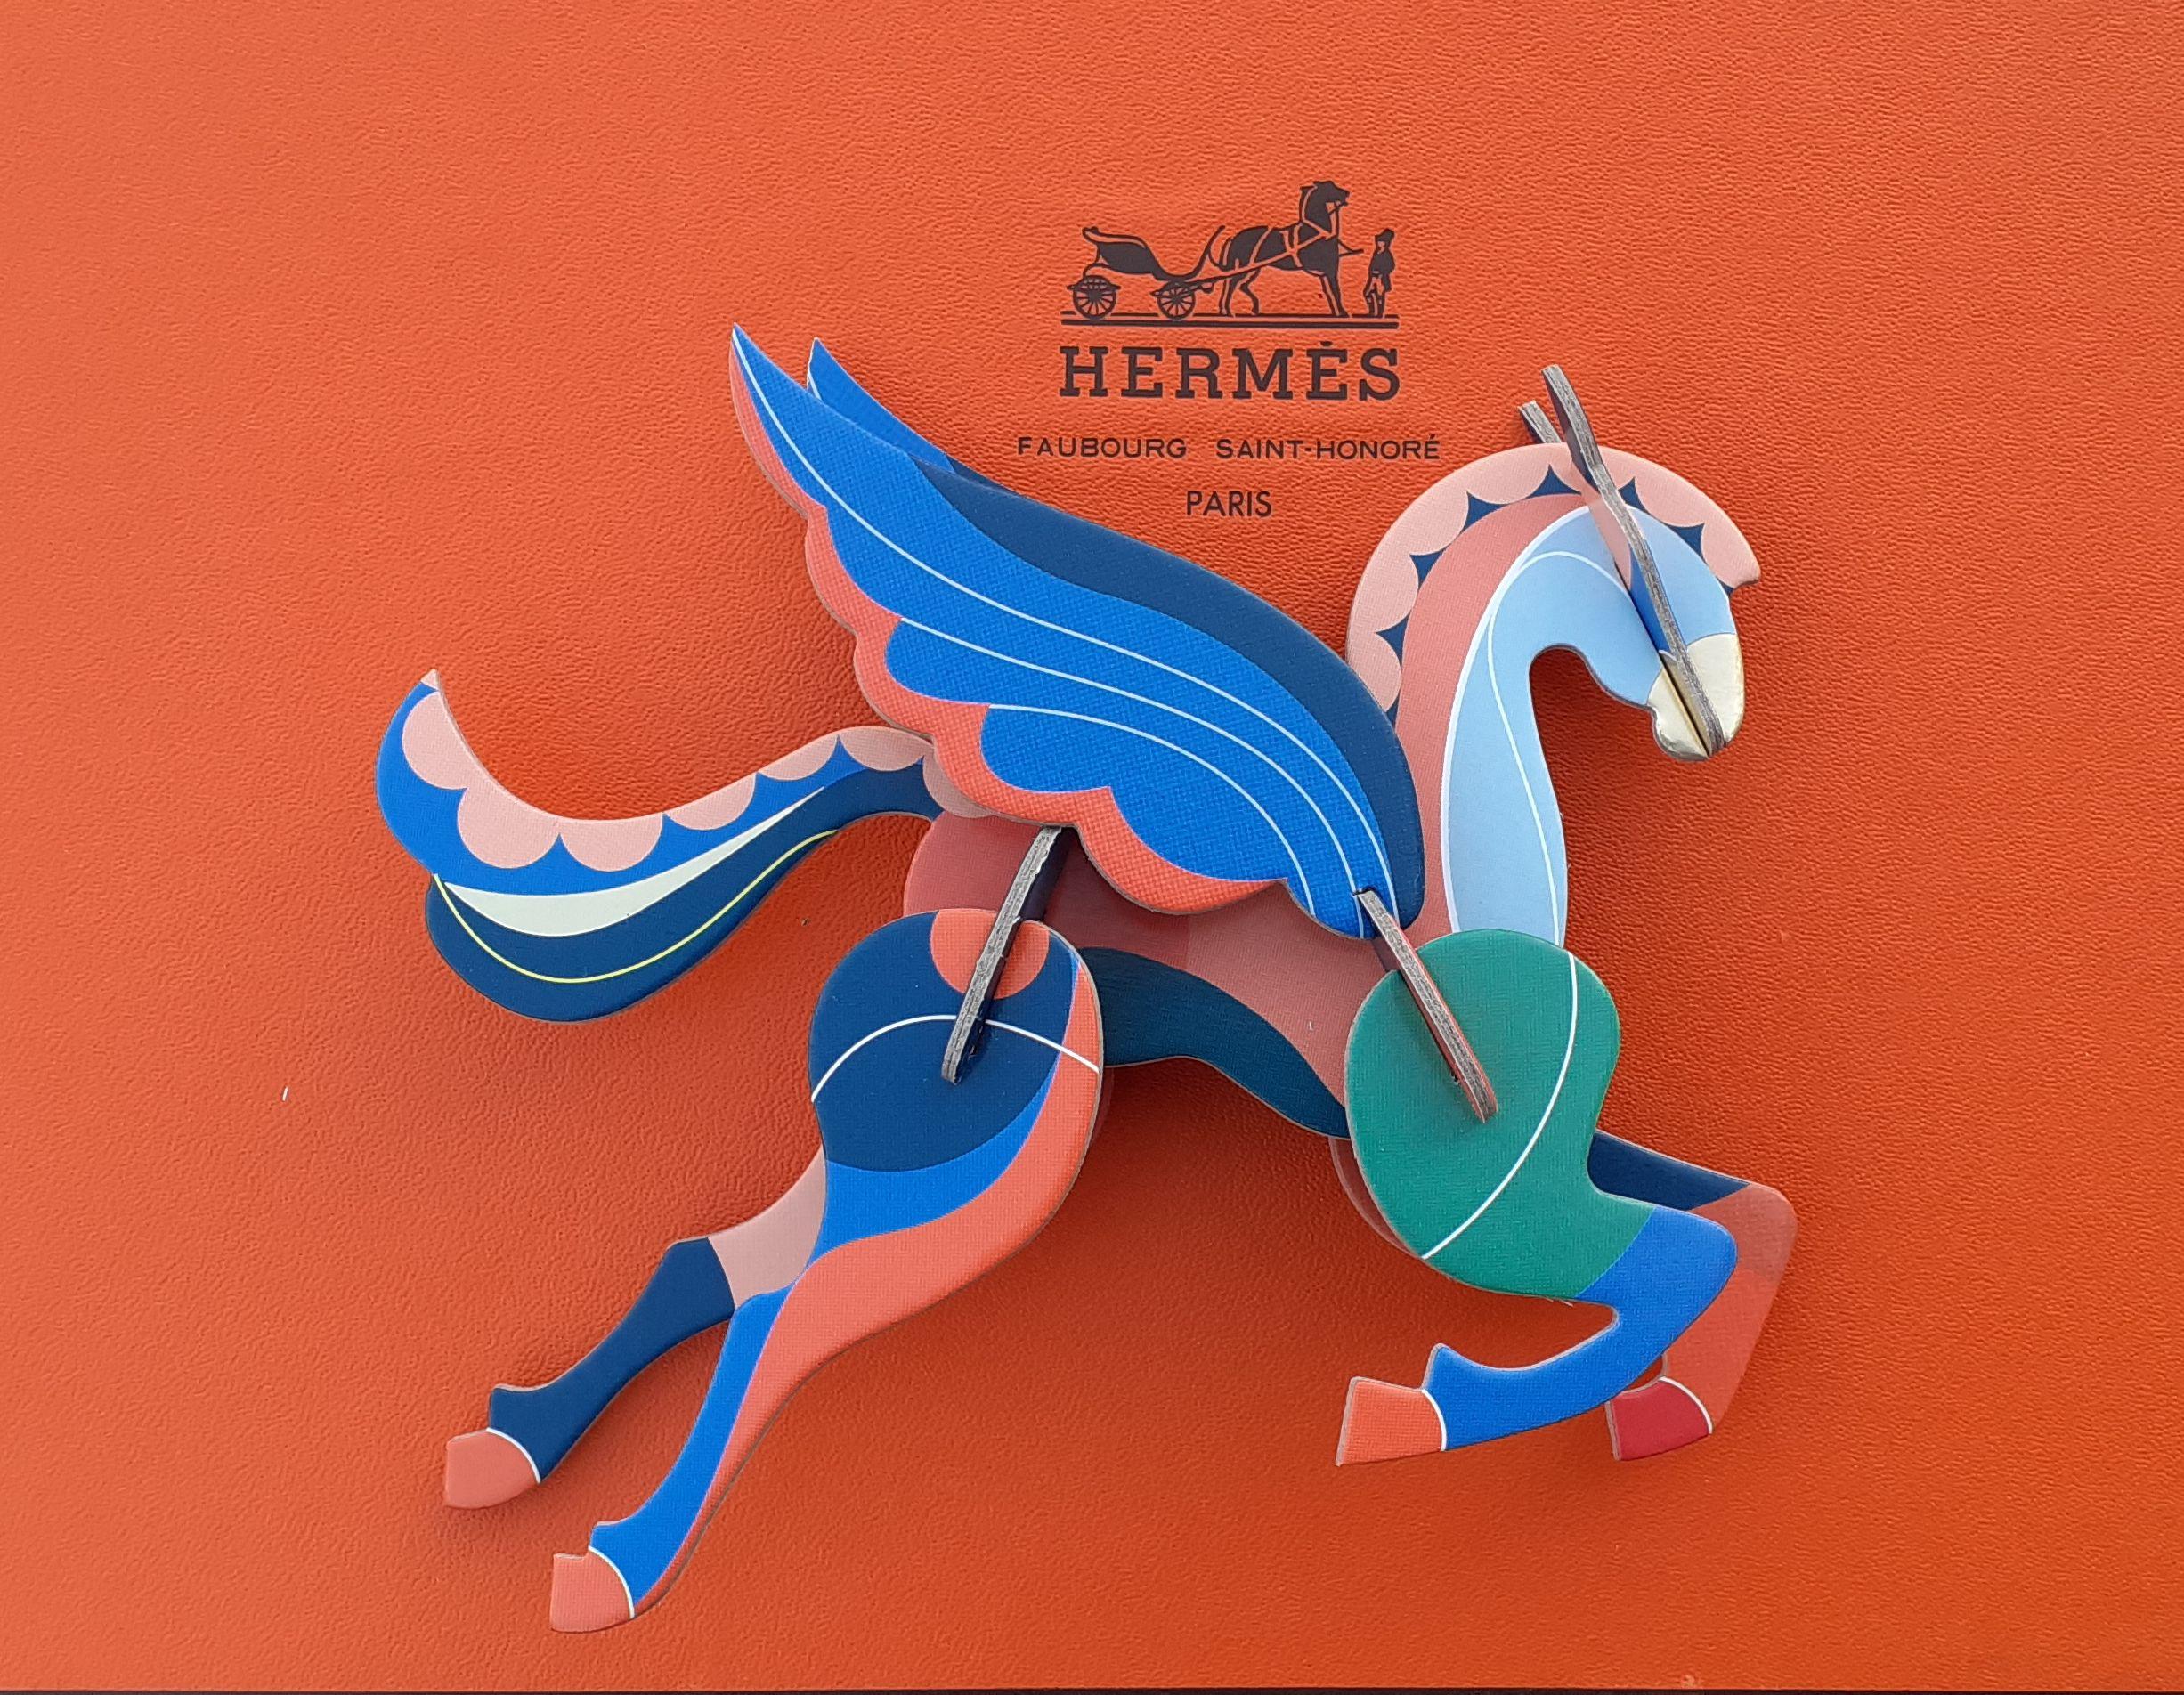 Super Cute Authentic Hermès Pegasus

Composed of 10 pieces of cardboard to assemble

A string will allow to suspend it

The assembly instructions are inside the packaging

Colorways: Blue, Pink, Green, Golden

Measurements (around): at Longest 14,5